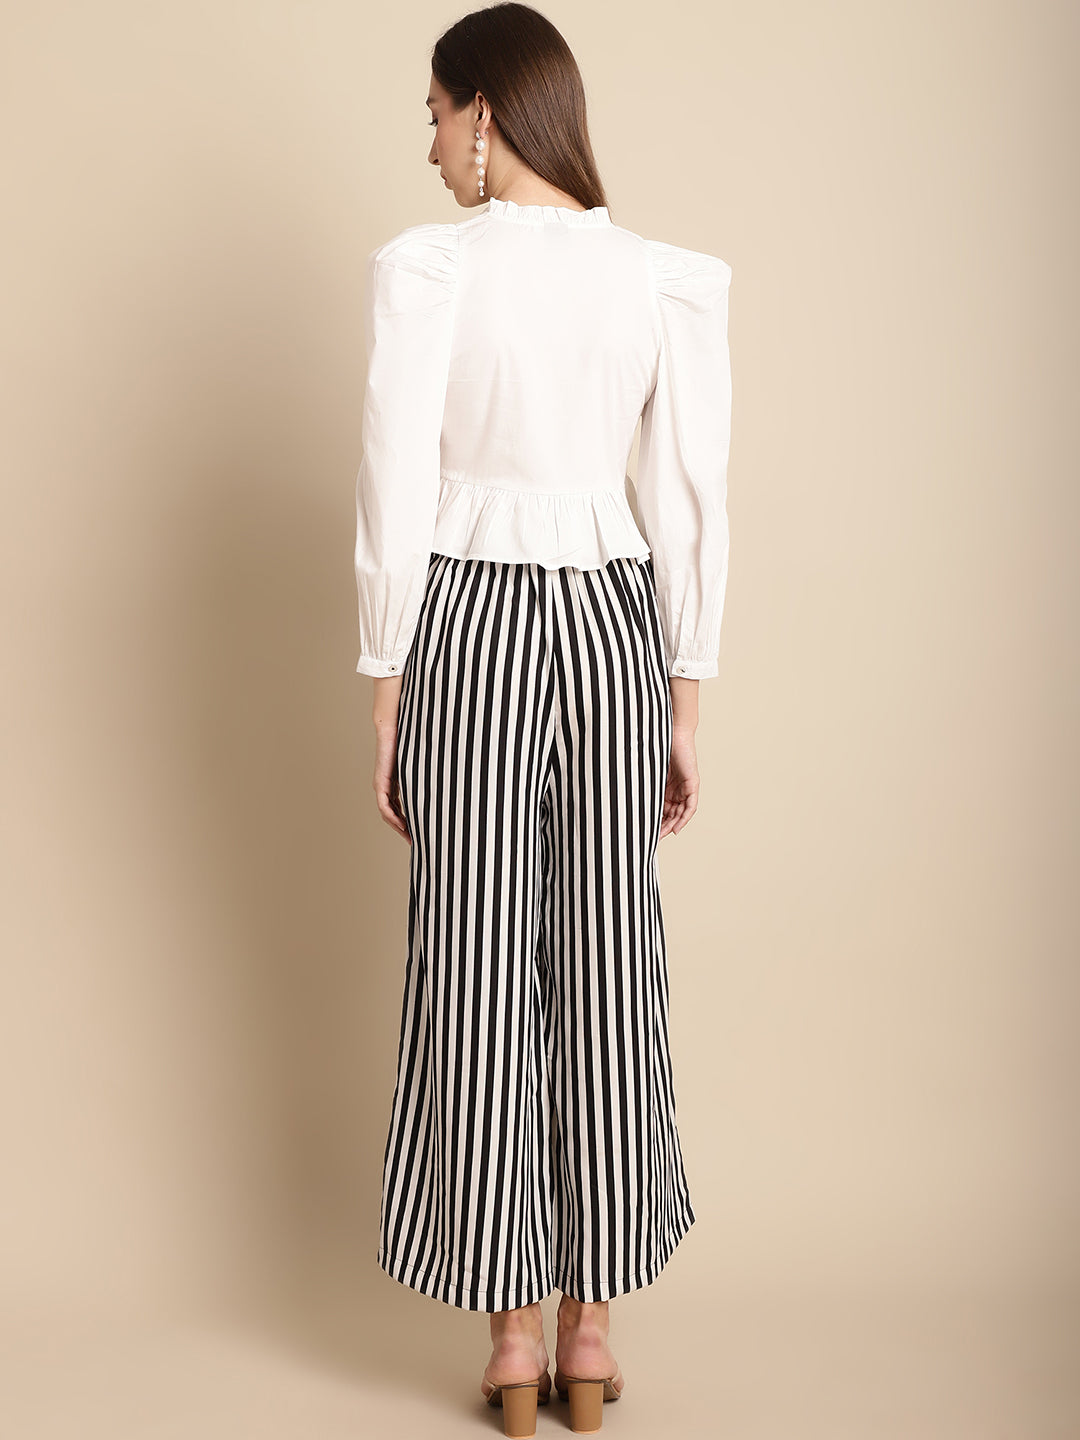 Blanc9 White And Black Pant With Top Co-Ord Set-B9ST127